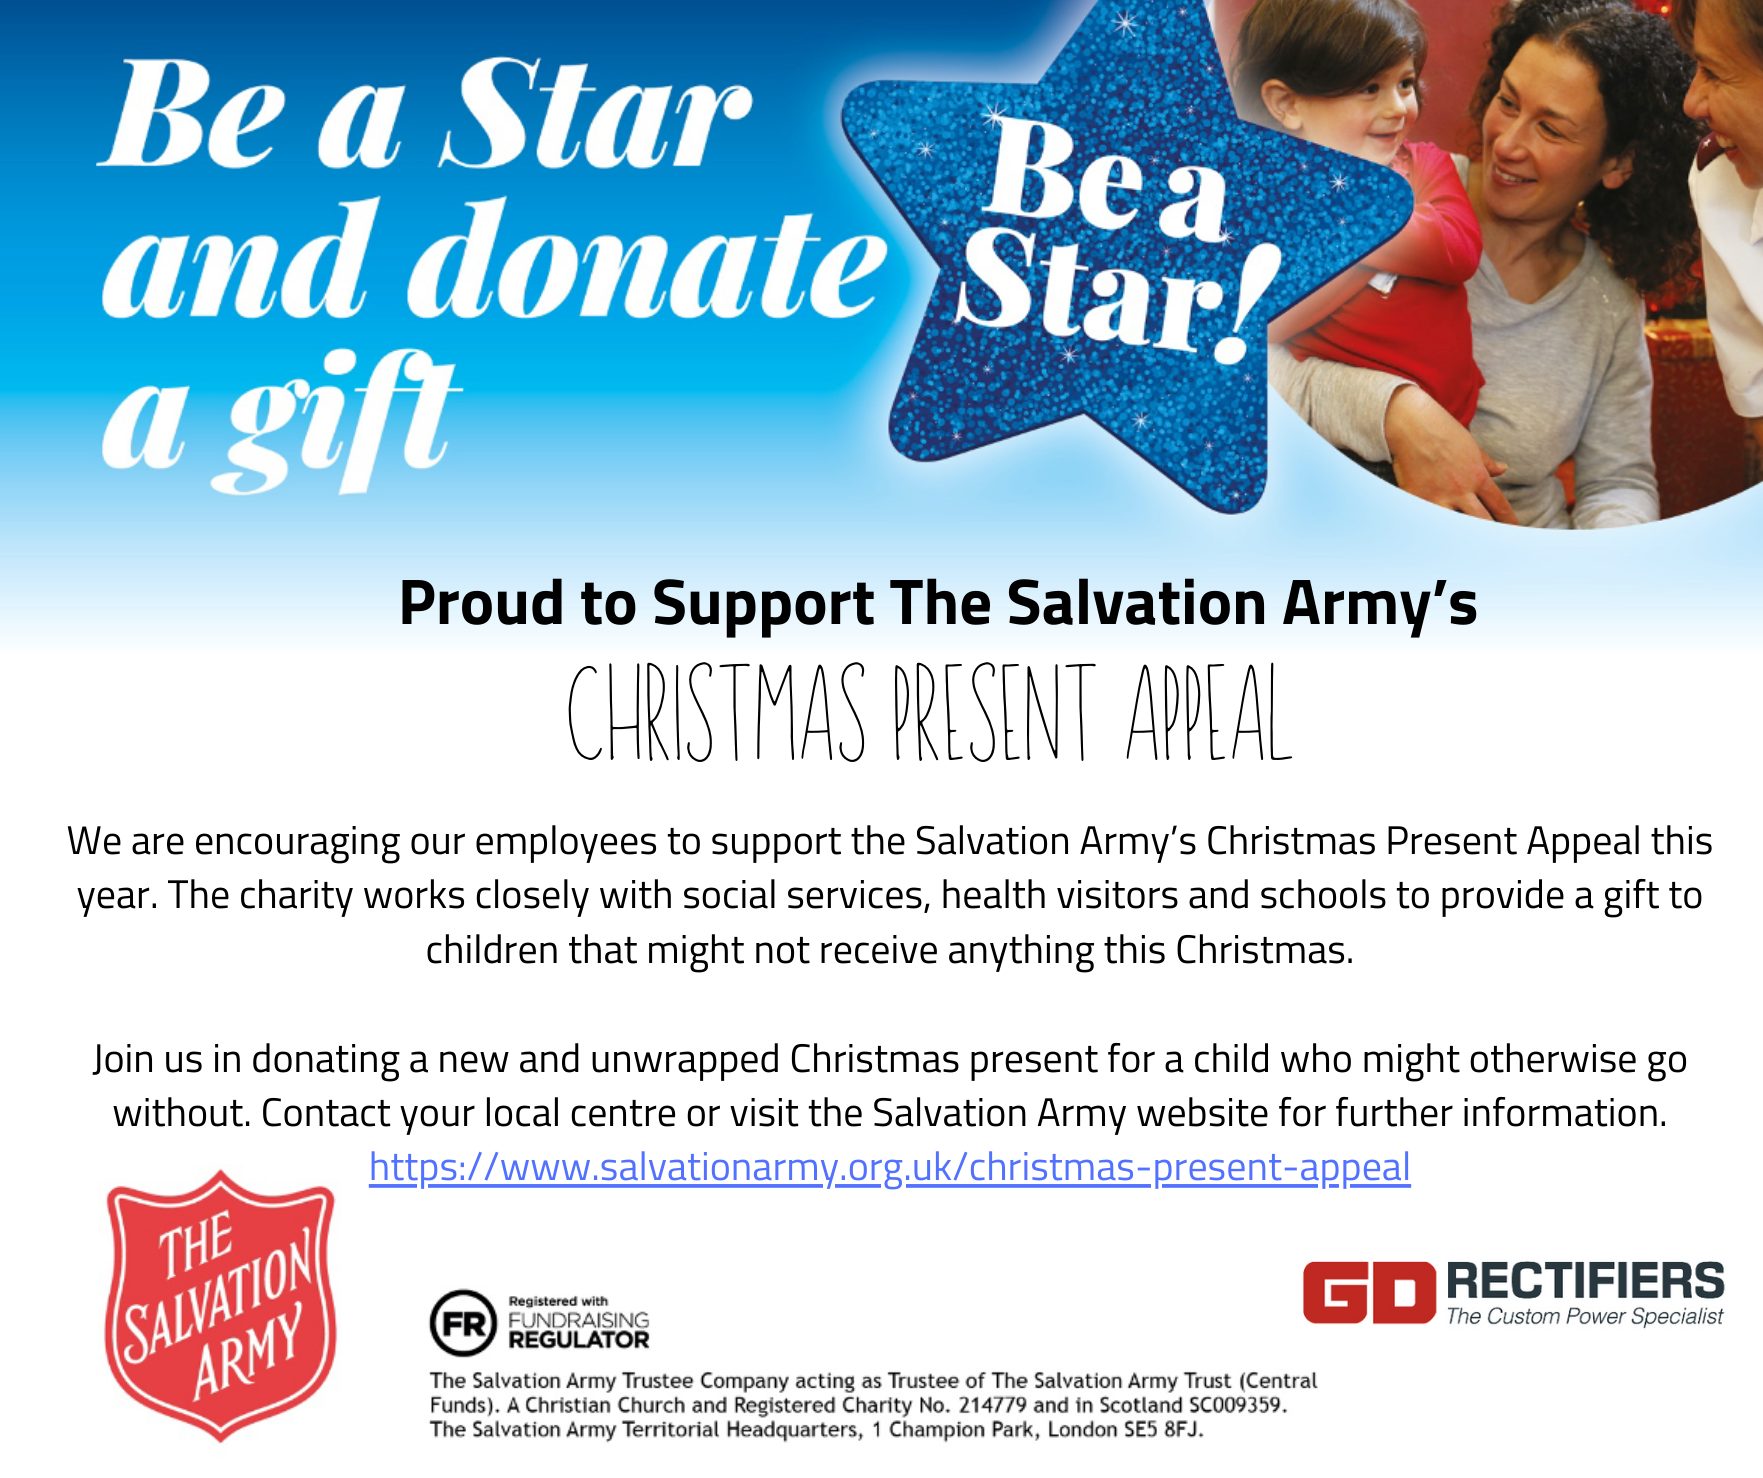 Salvation Army's Christmas Present Appeal